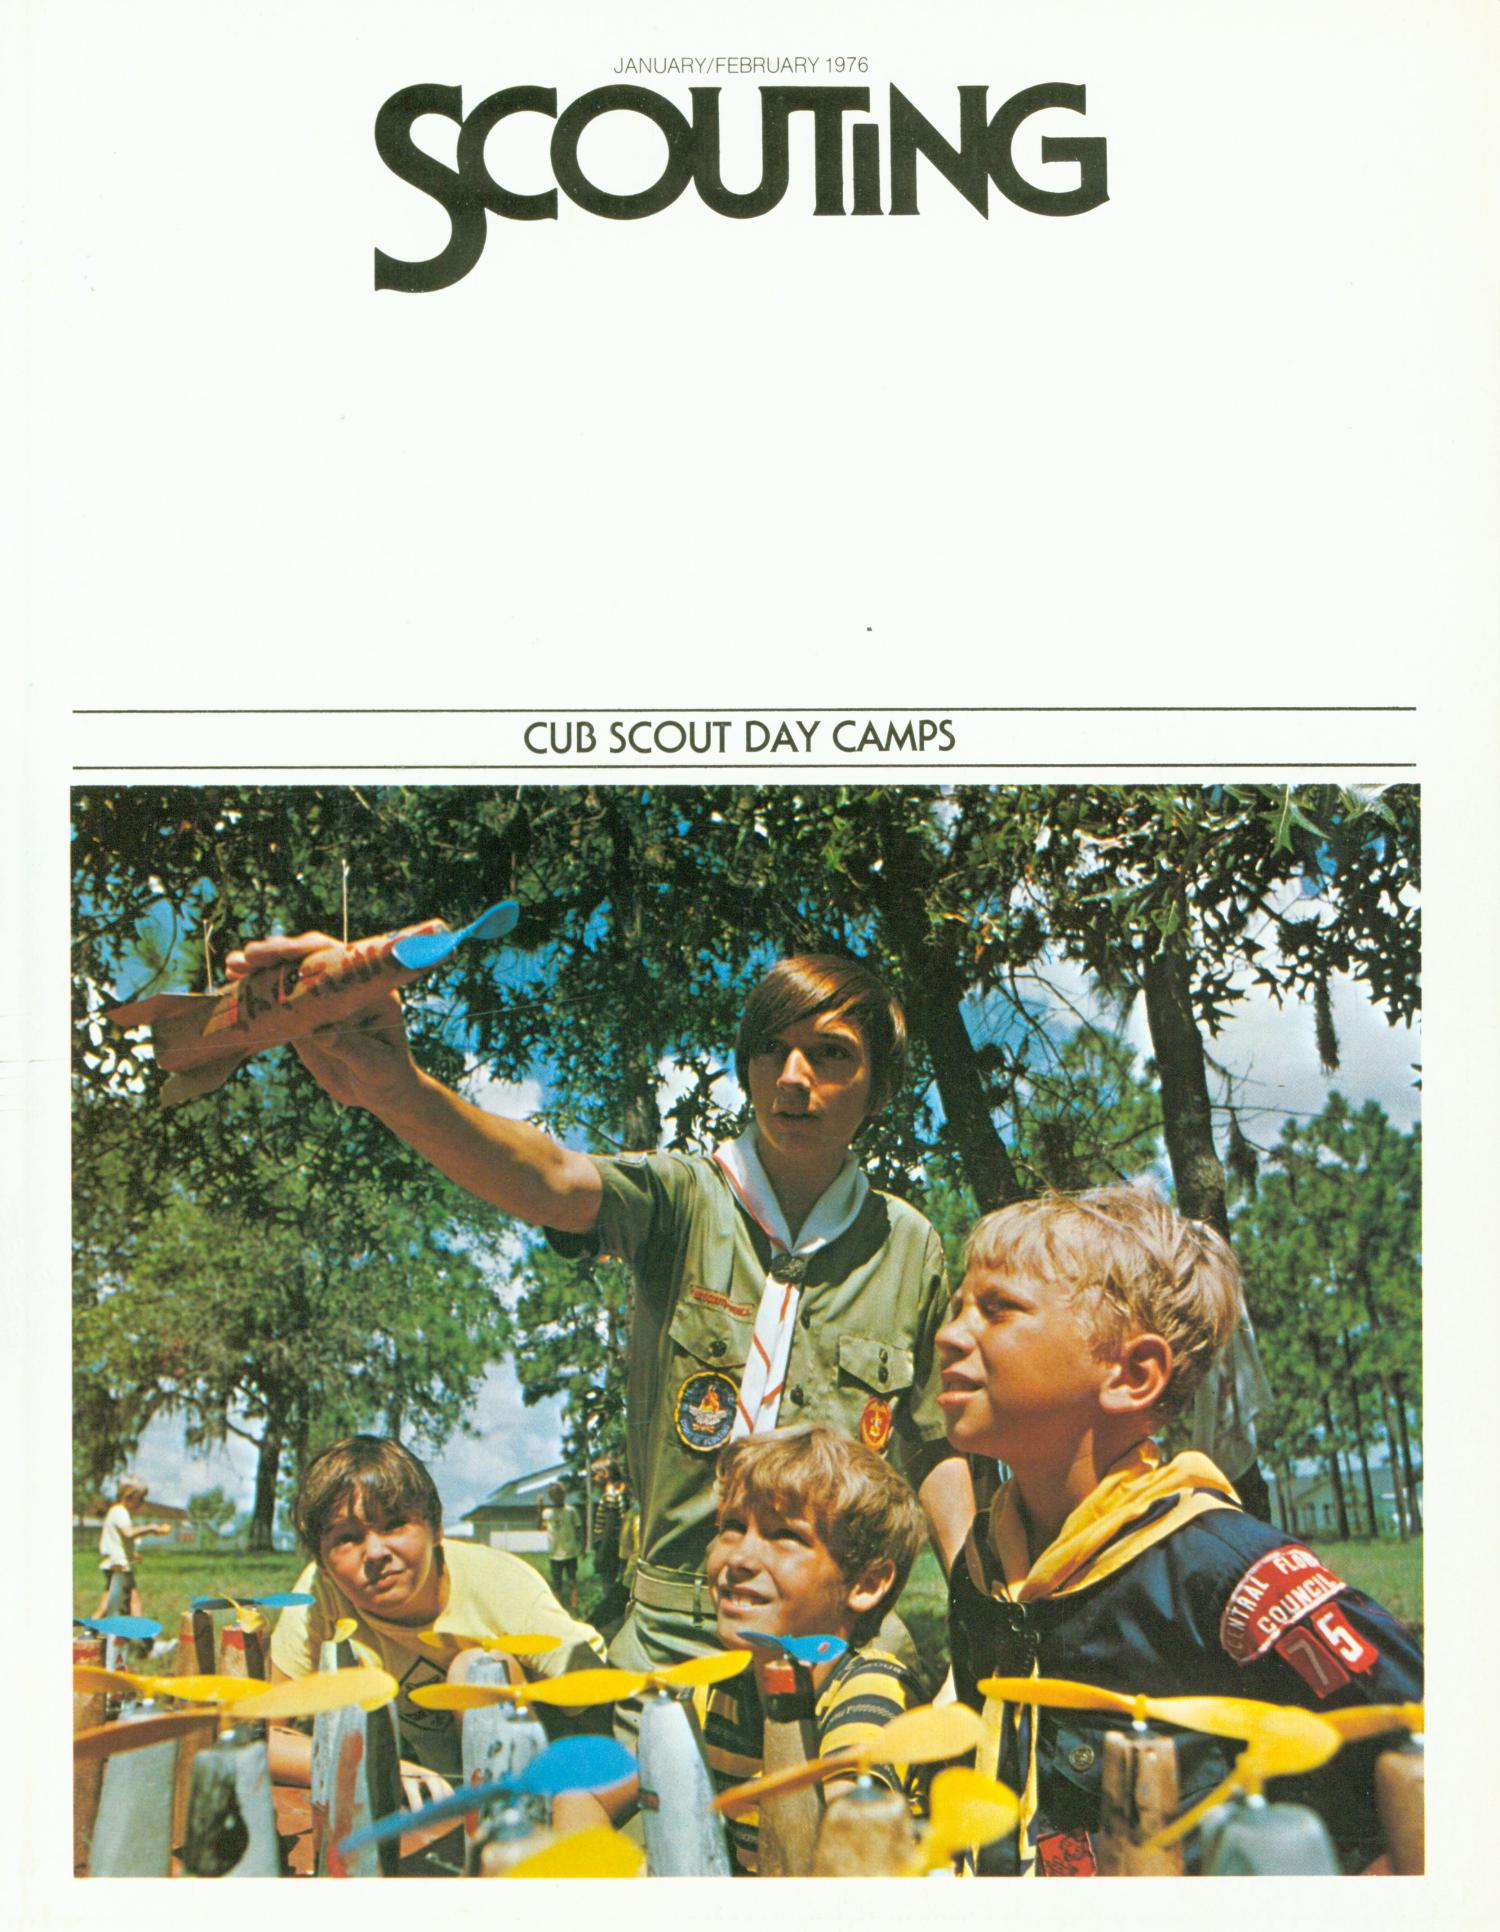 Scouting, Volume 64, Number 1, January-February 1976
                                                
                                                    Front Cover
                                                